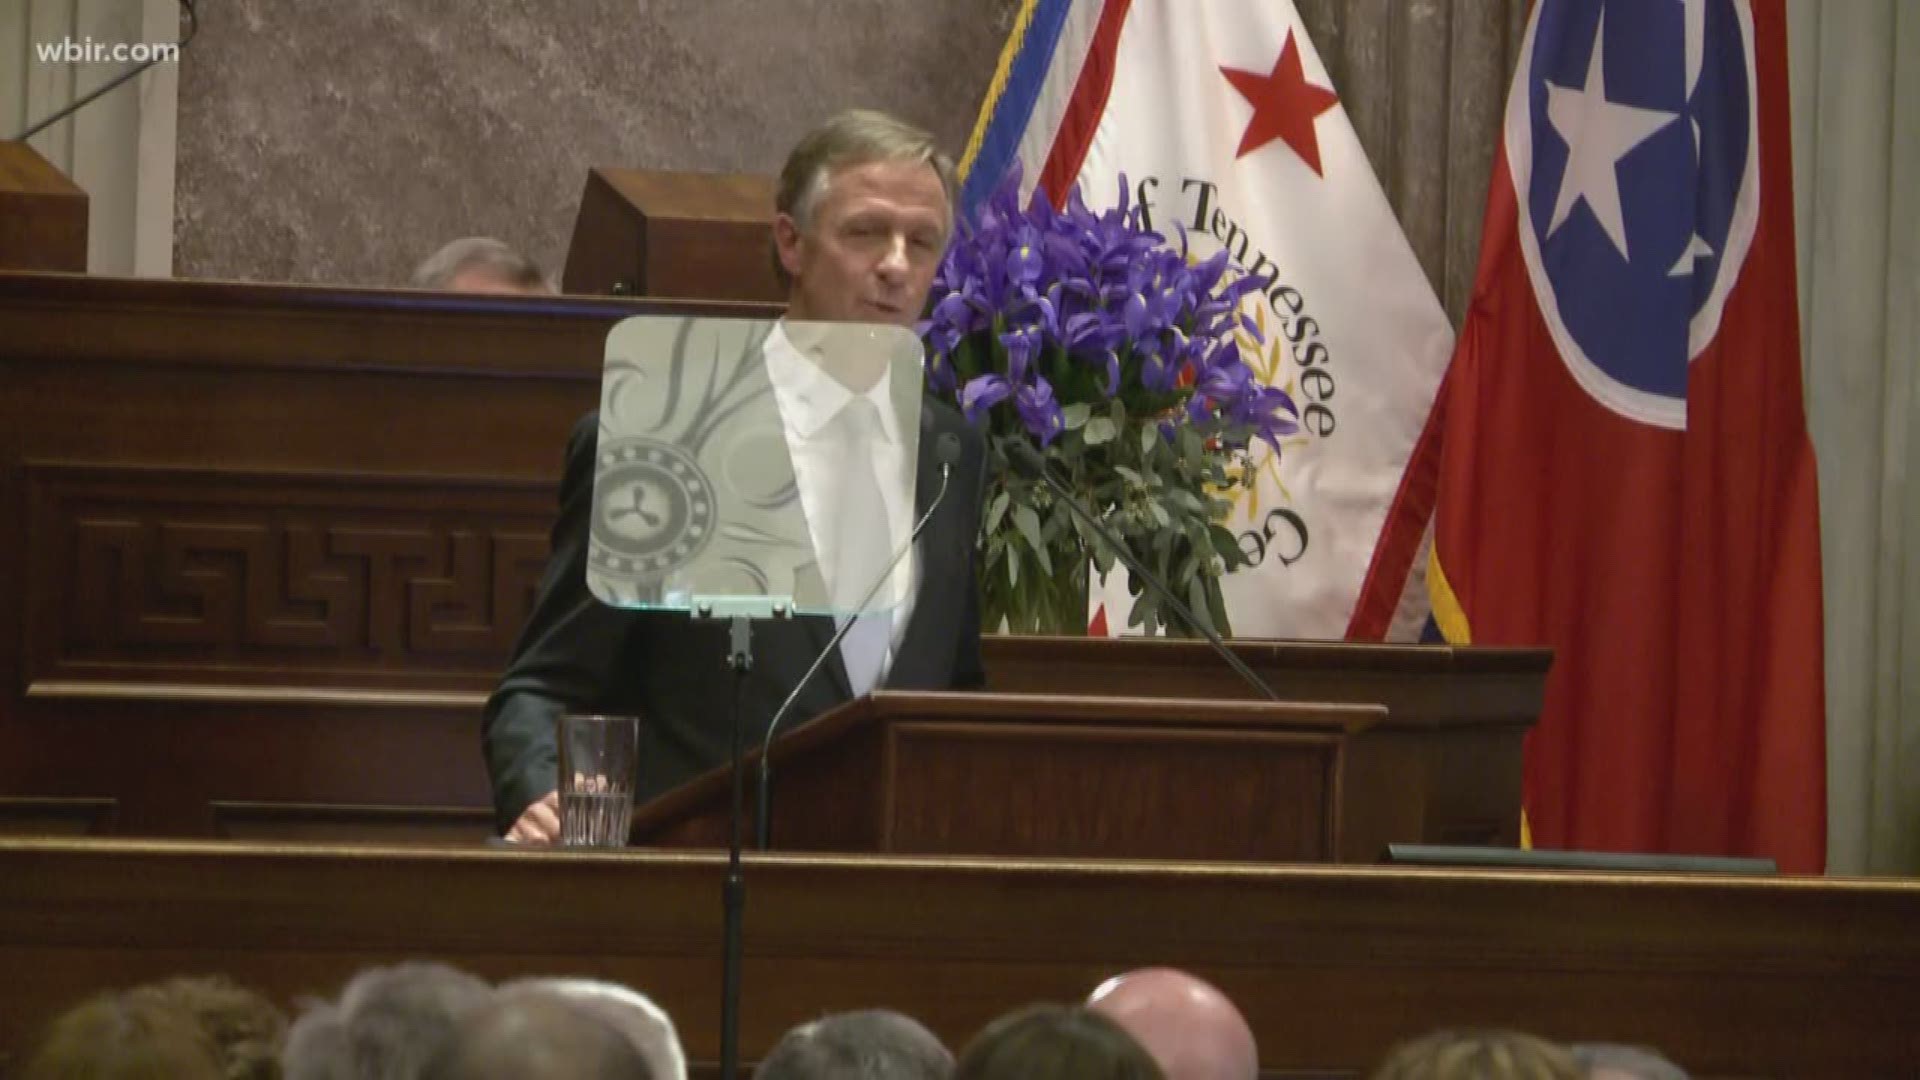 Jan. 29, 2018: Seven years after taking office, Gov. Bill Haslam gave his final State of the State address, calling on Tennessee to lead the nation in jobs, education and government efficiency.